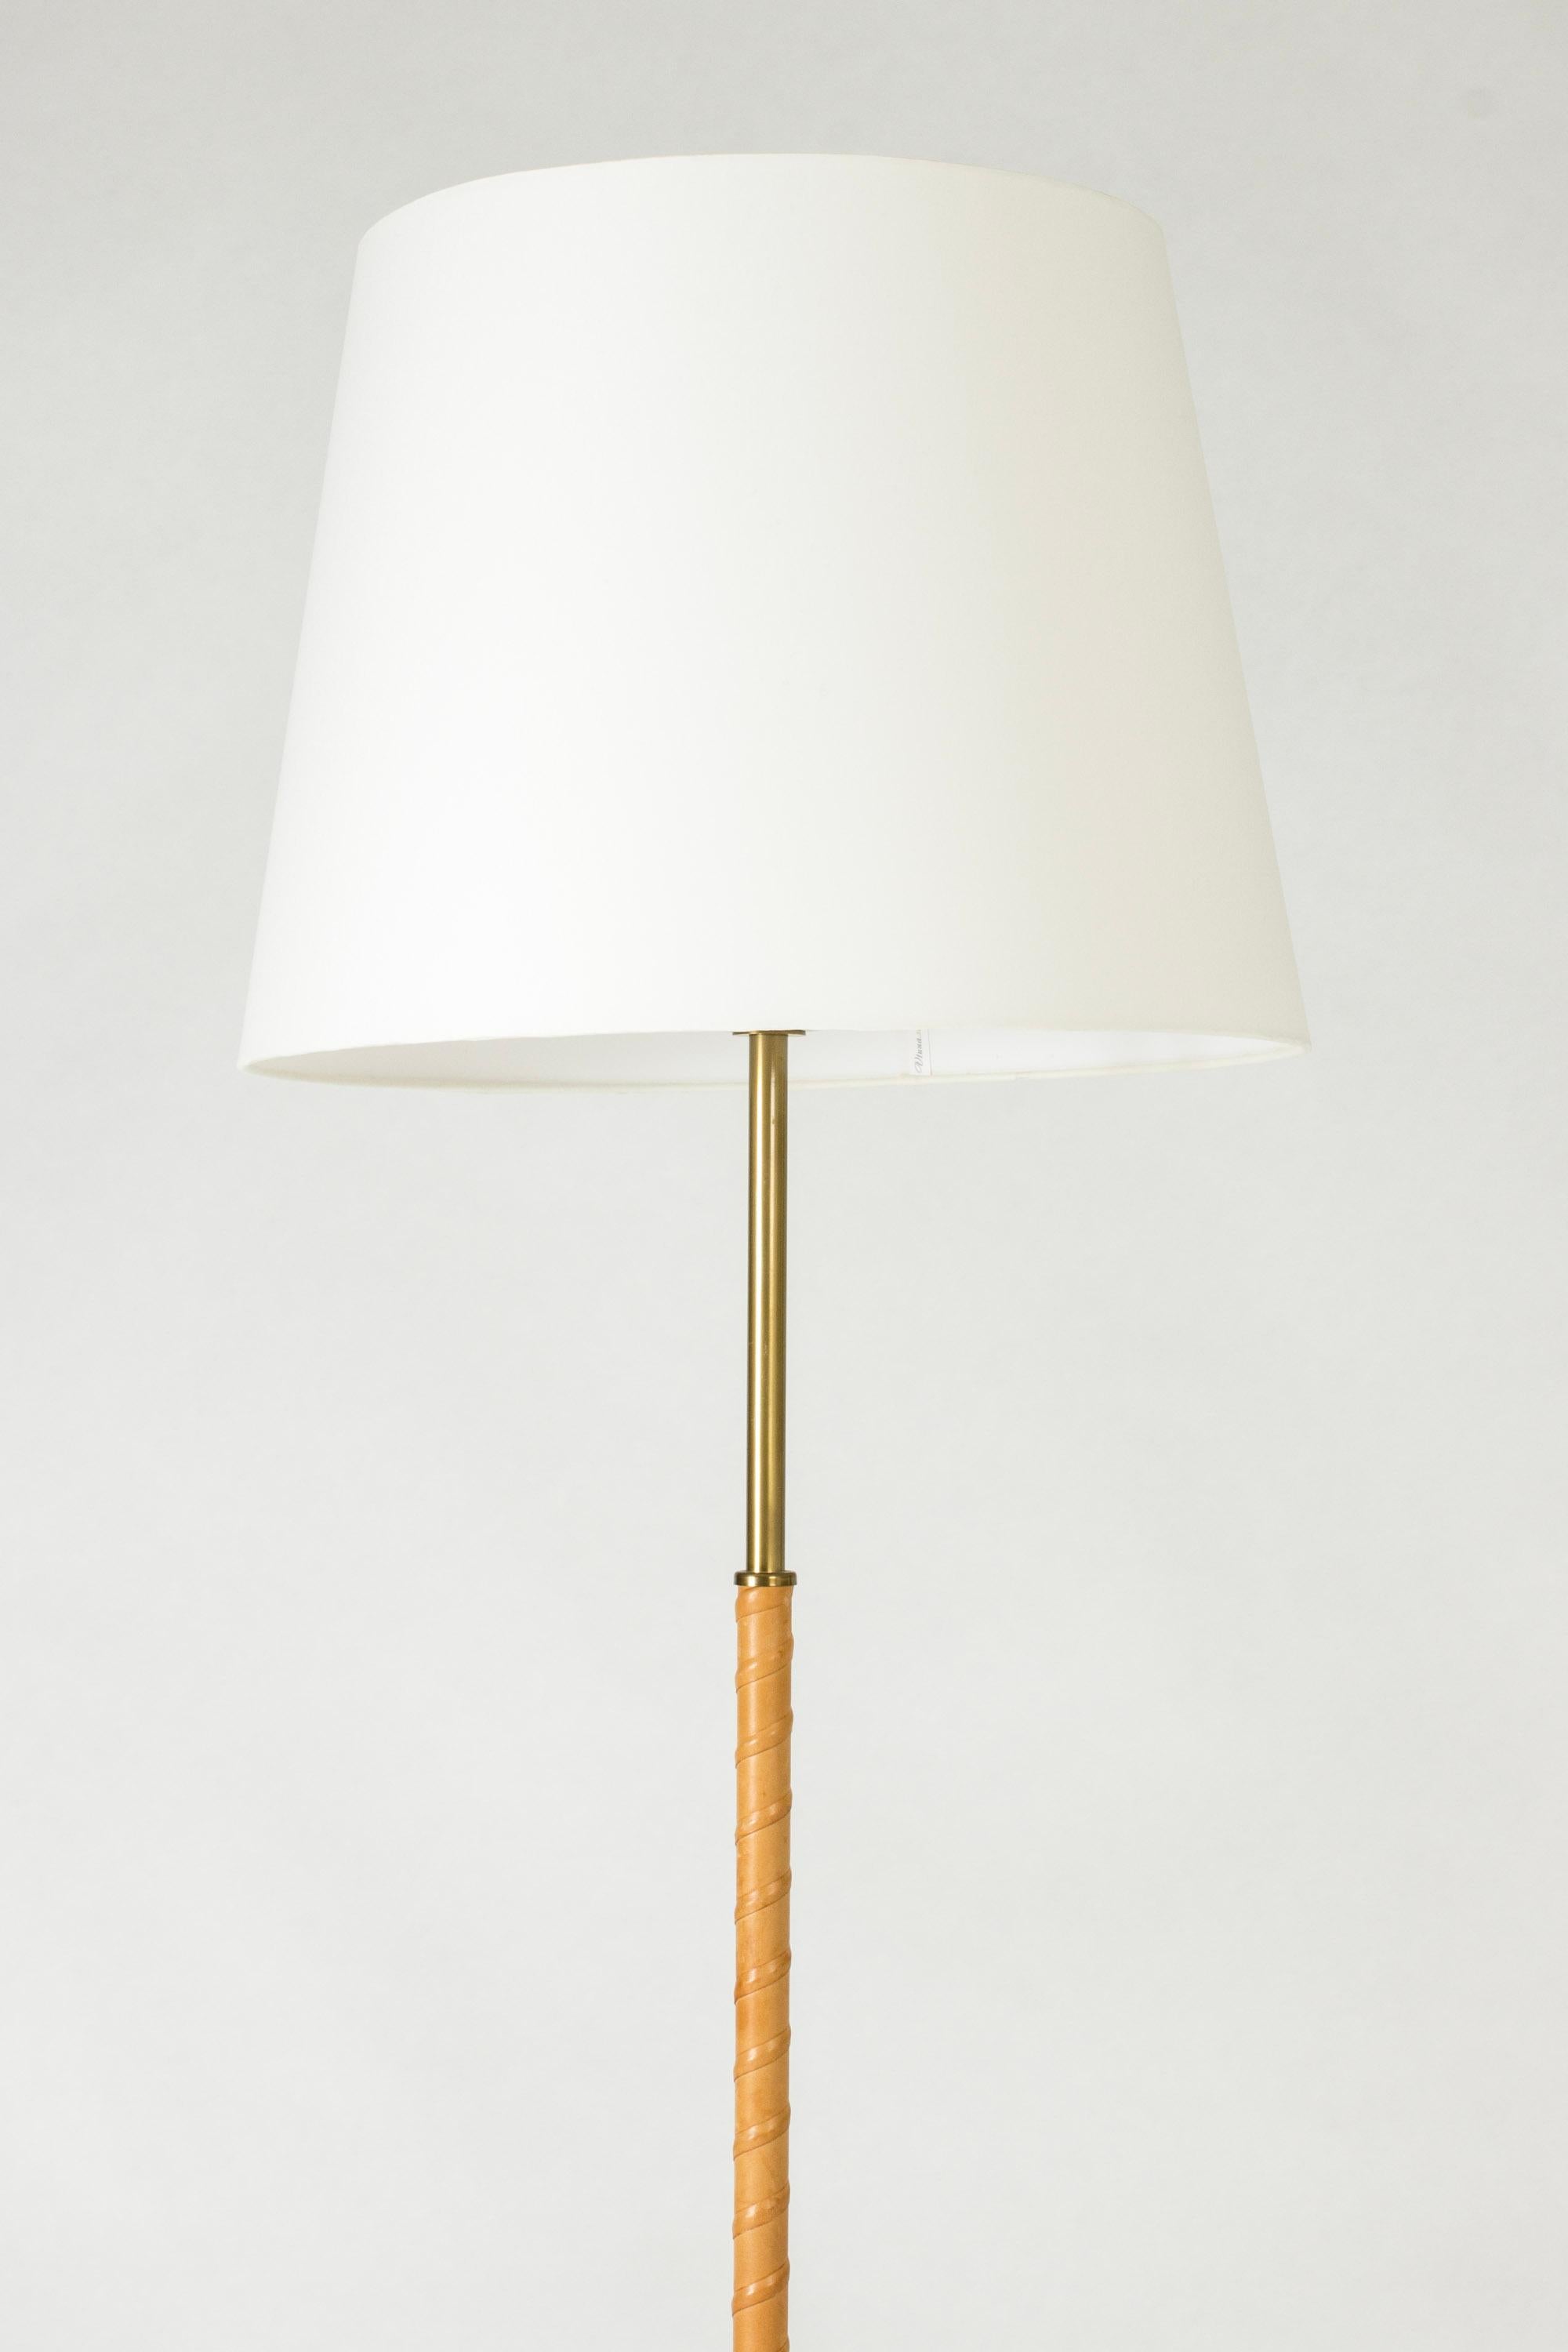 Floor lamp from Böhlmarks, made from brass with a leather wound stem. An elegant, timeless piece.